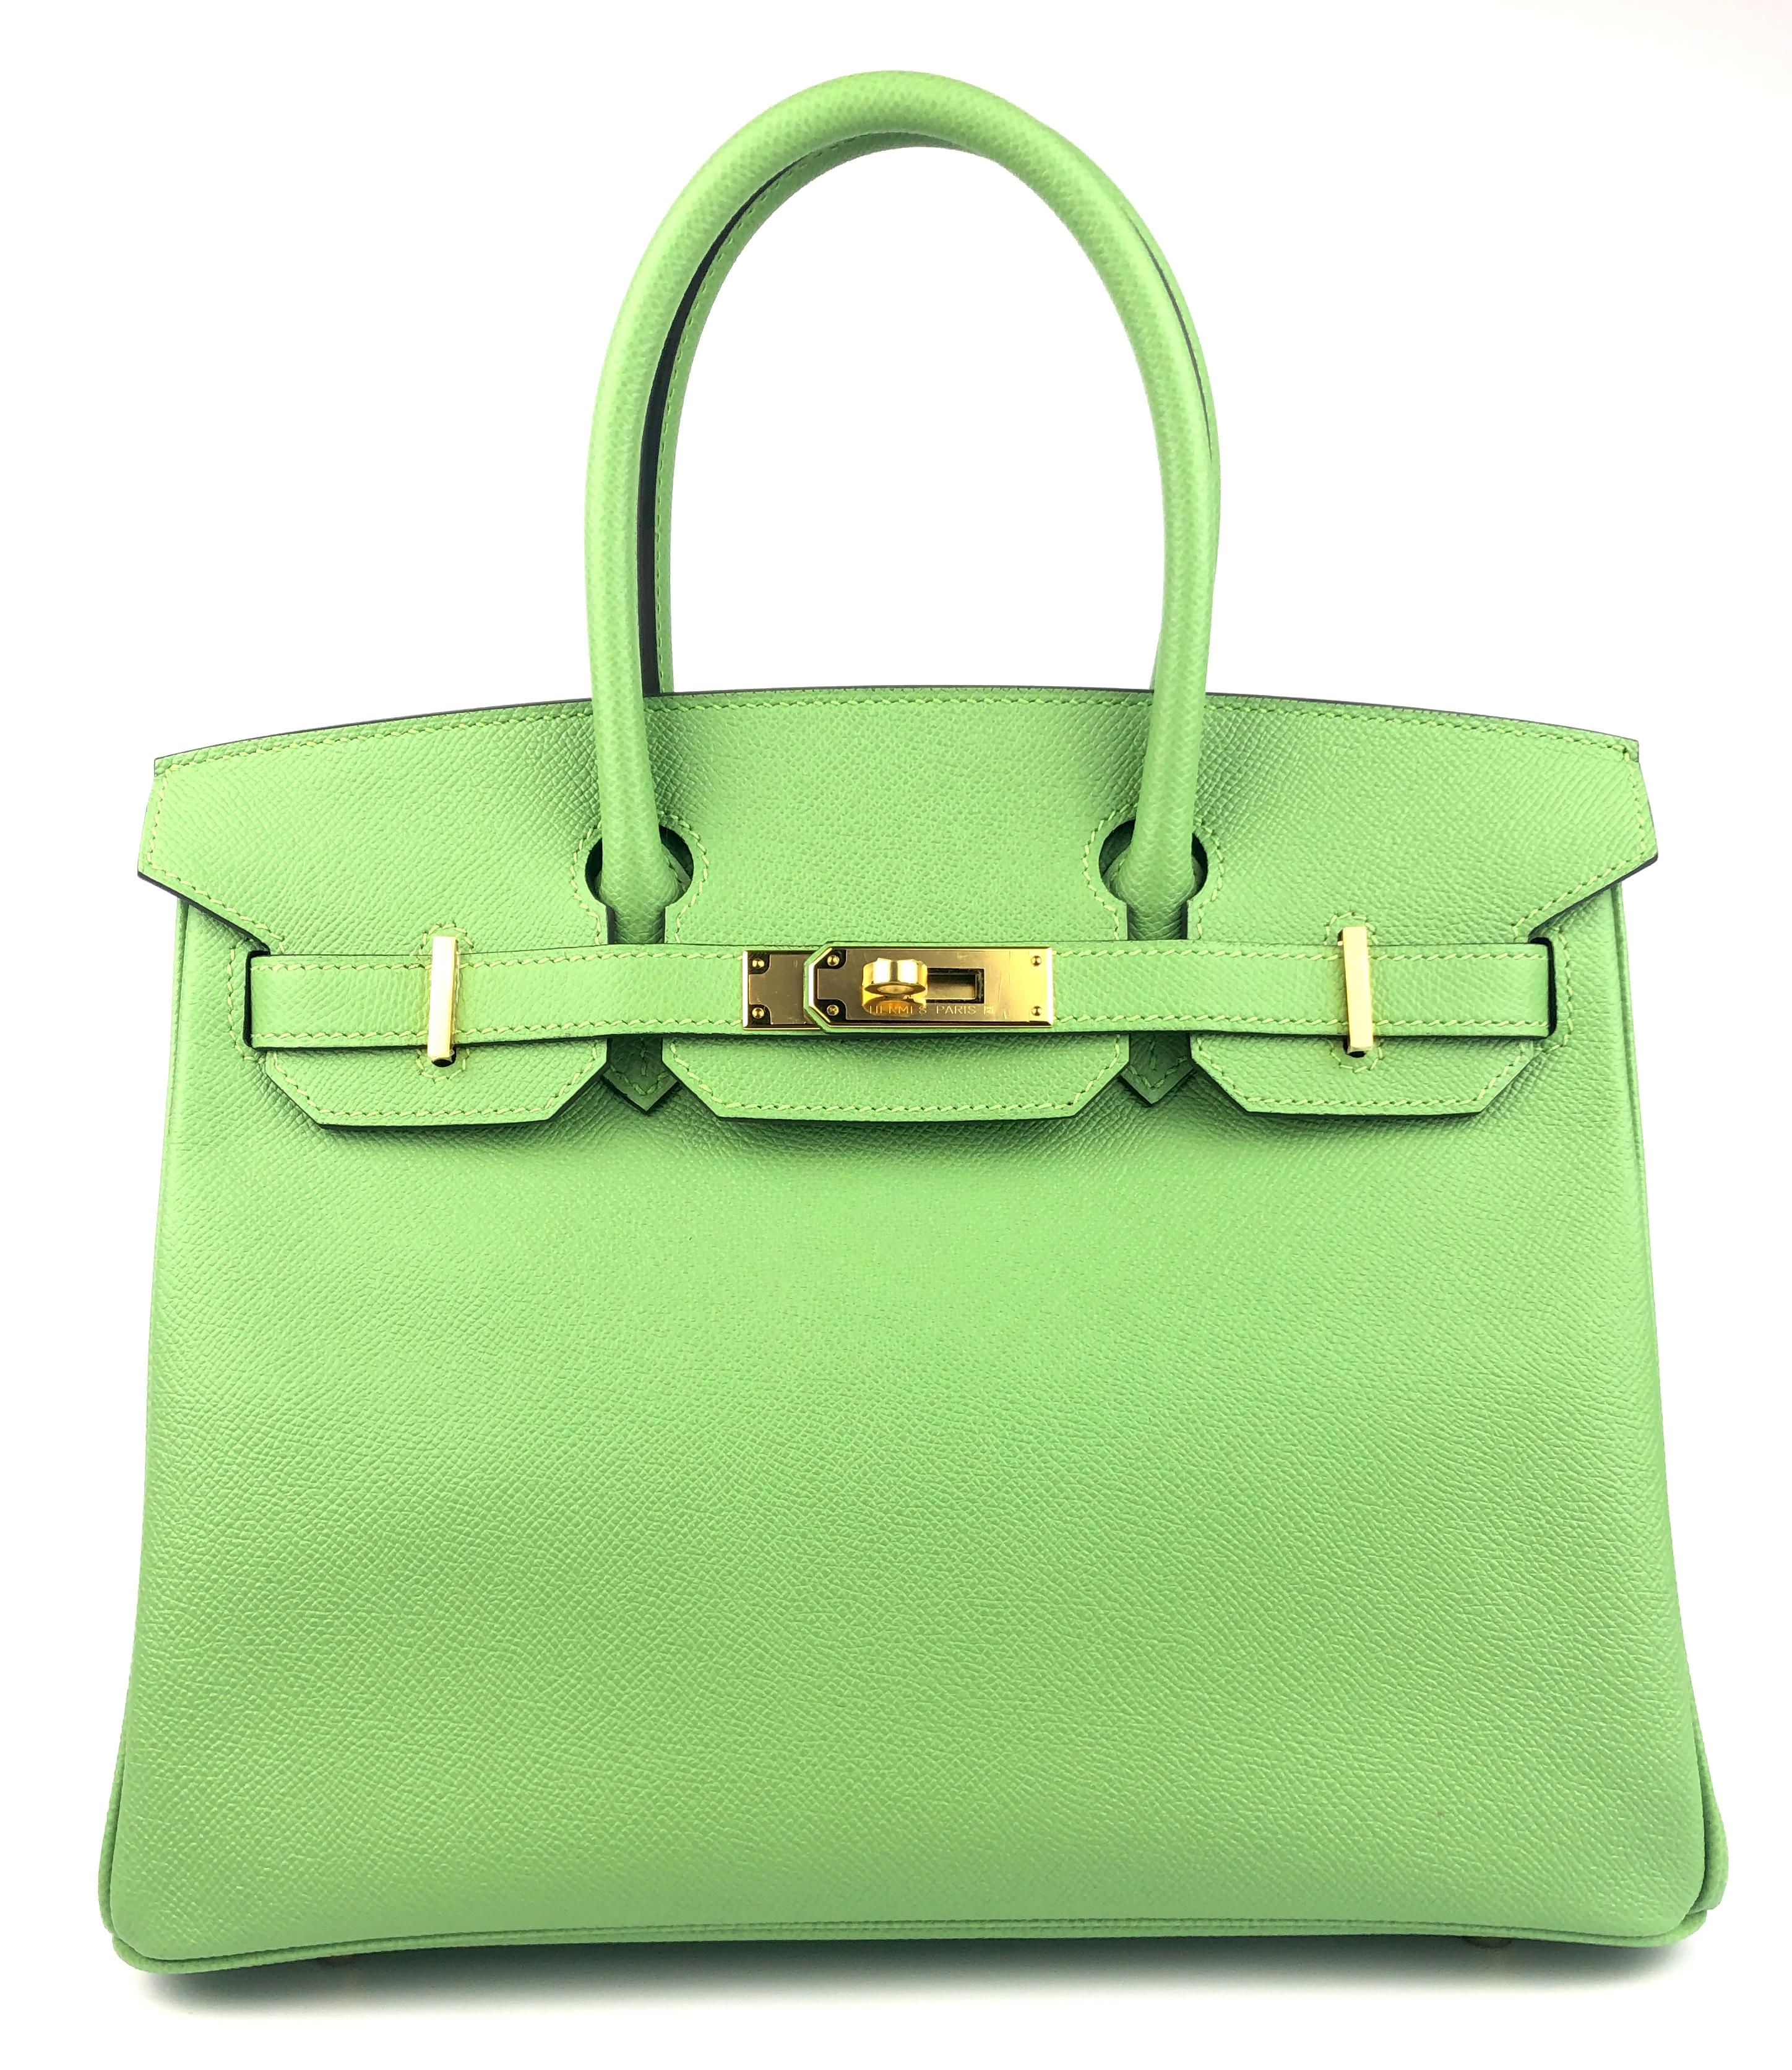 Rare and most coveted colors since its release in 2020. AS NEW 2020 Hermes Birkin 30 Vert Criquet Epsom Leather Gold Hardware . Y Stamp 2020. 

Shop with Confidence from Lux Addicts. Authenticity Guaranteed!
